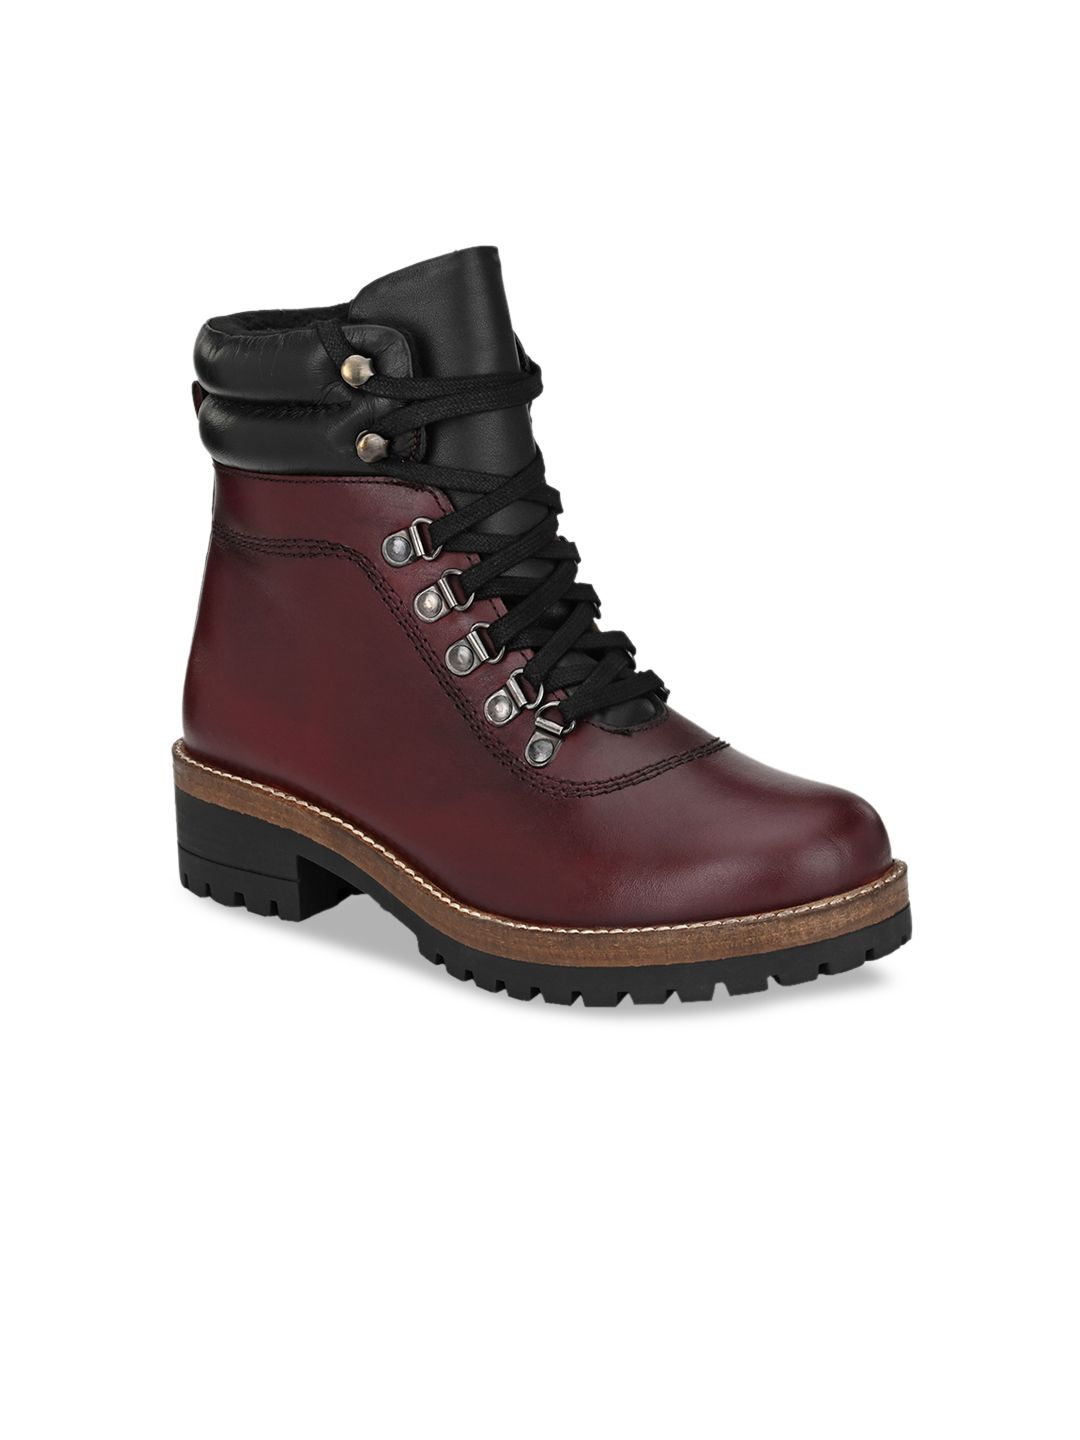 Delize Women Burgundy Solid Leather High-Top Flat Boots Price in India